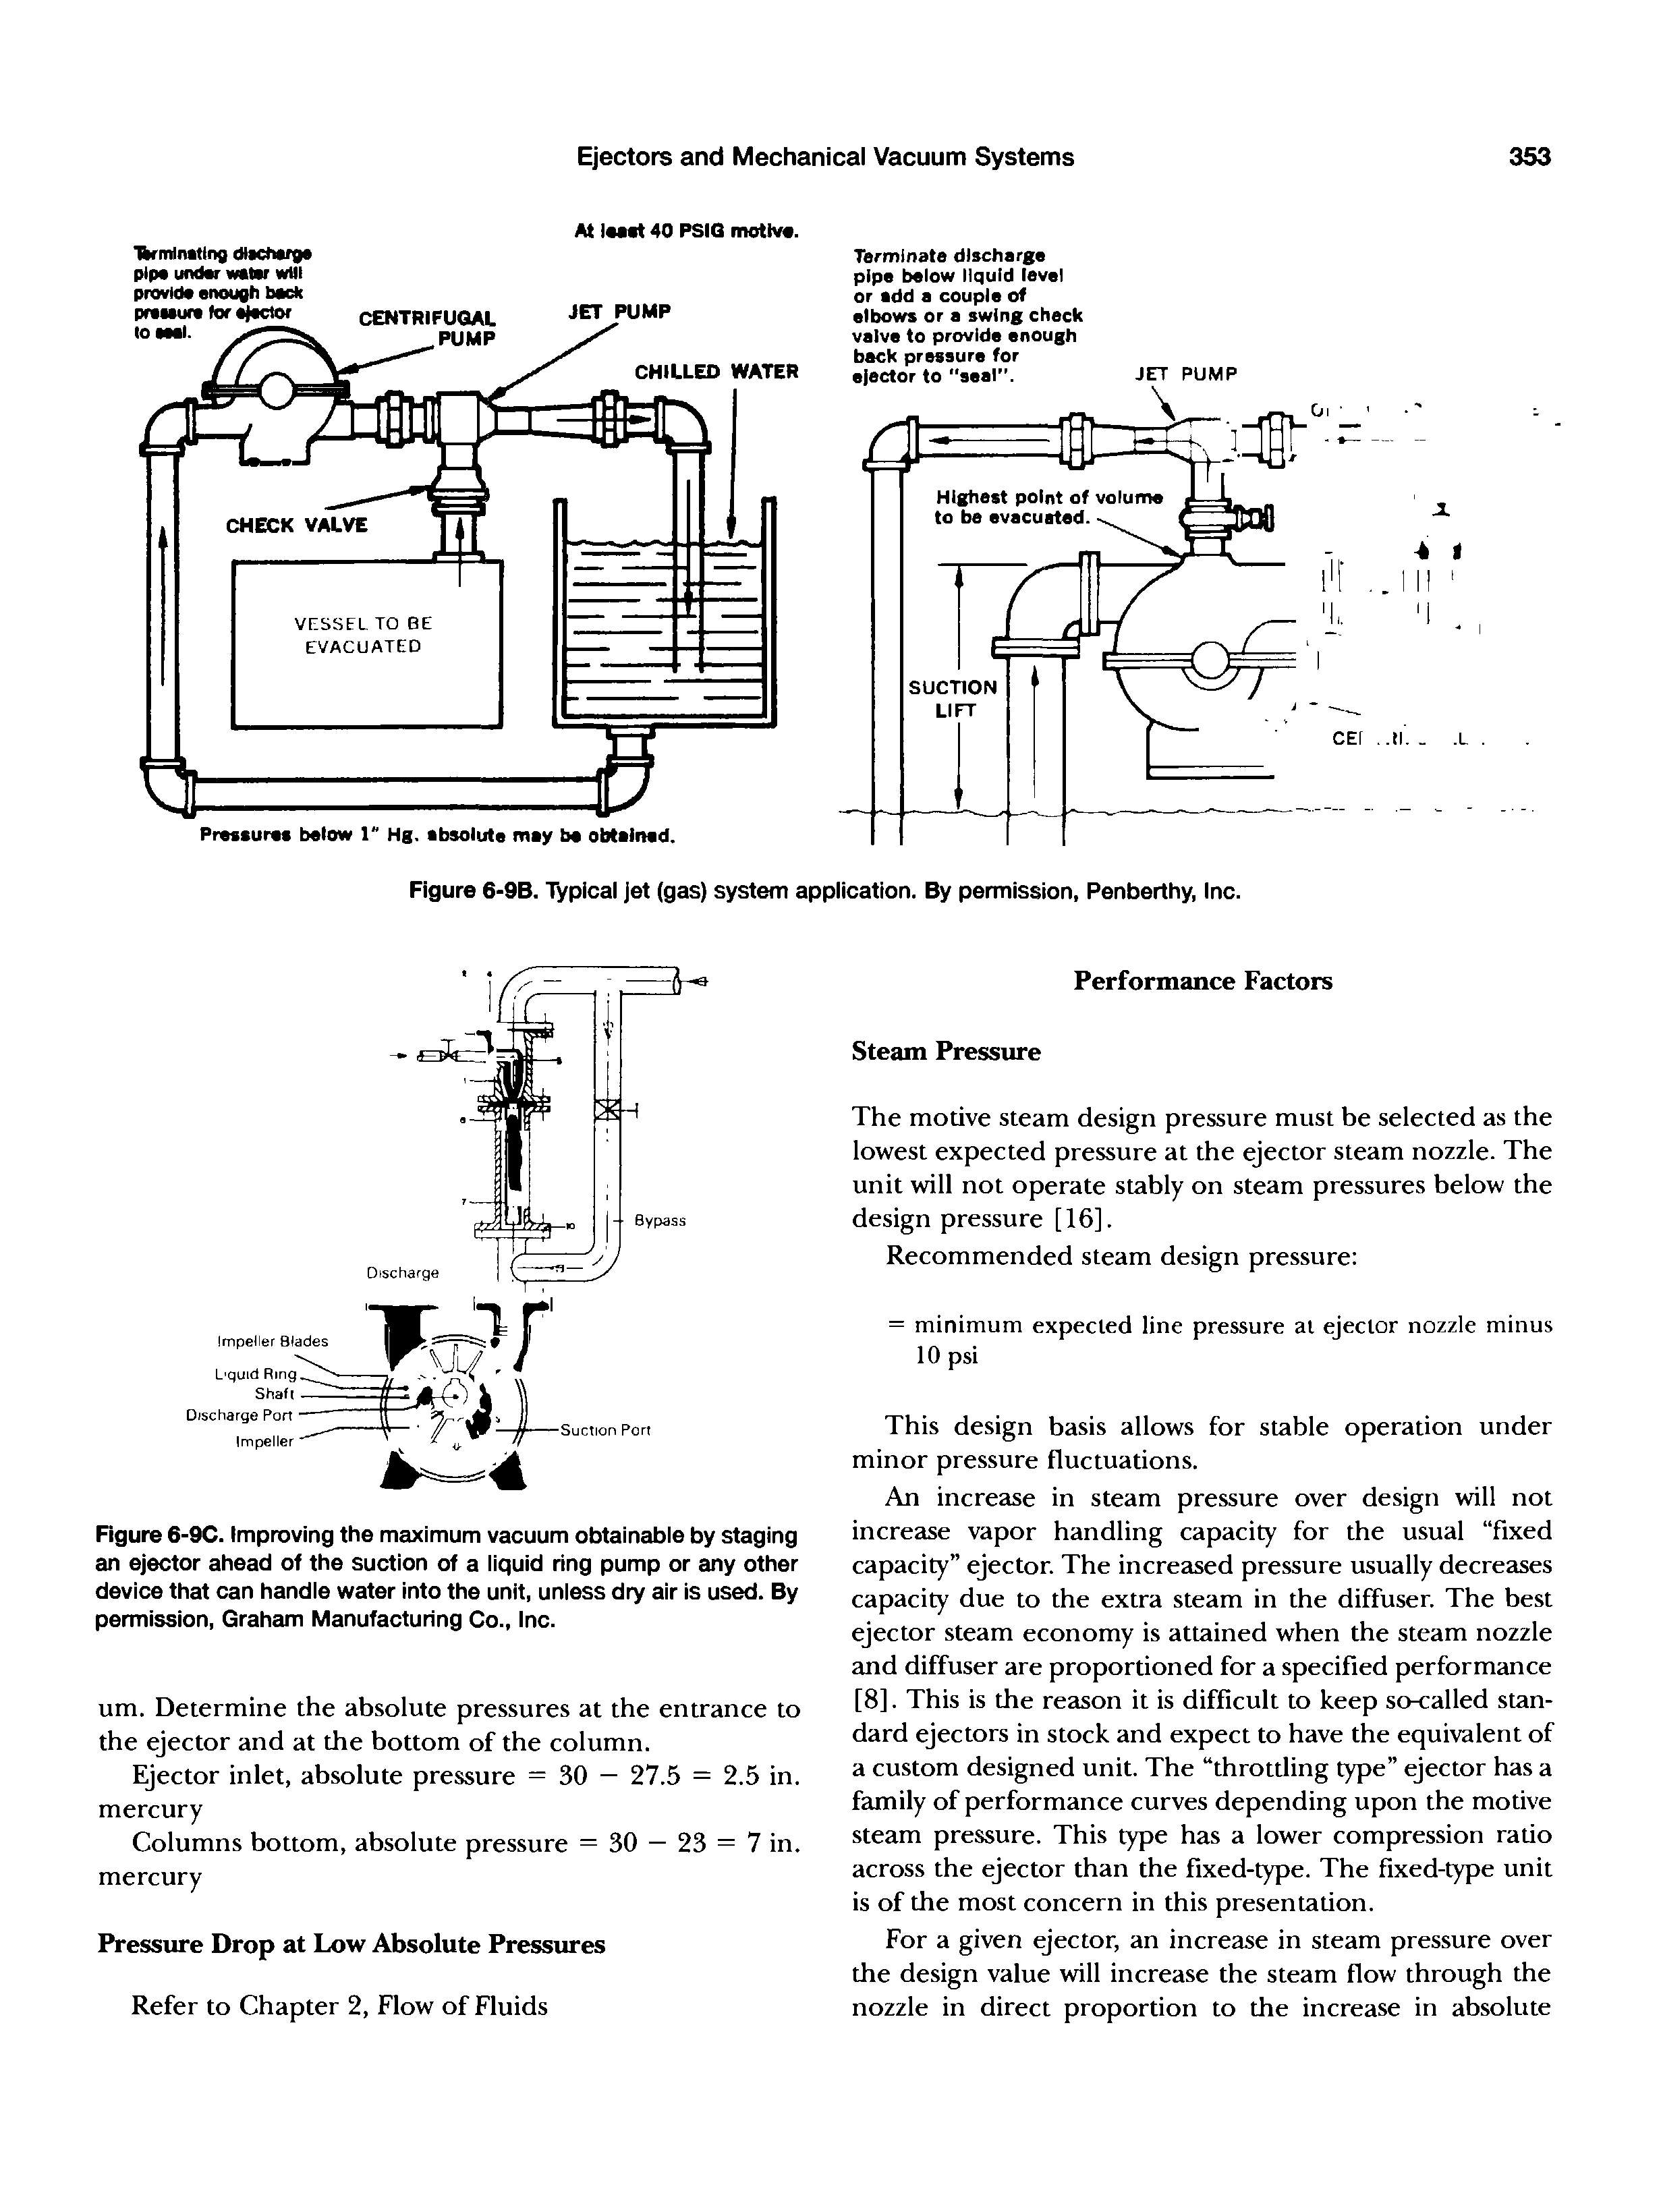 Figure 6-9B. Typical Jet (gas) system application. By permission, Penberthy, Inc.